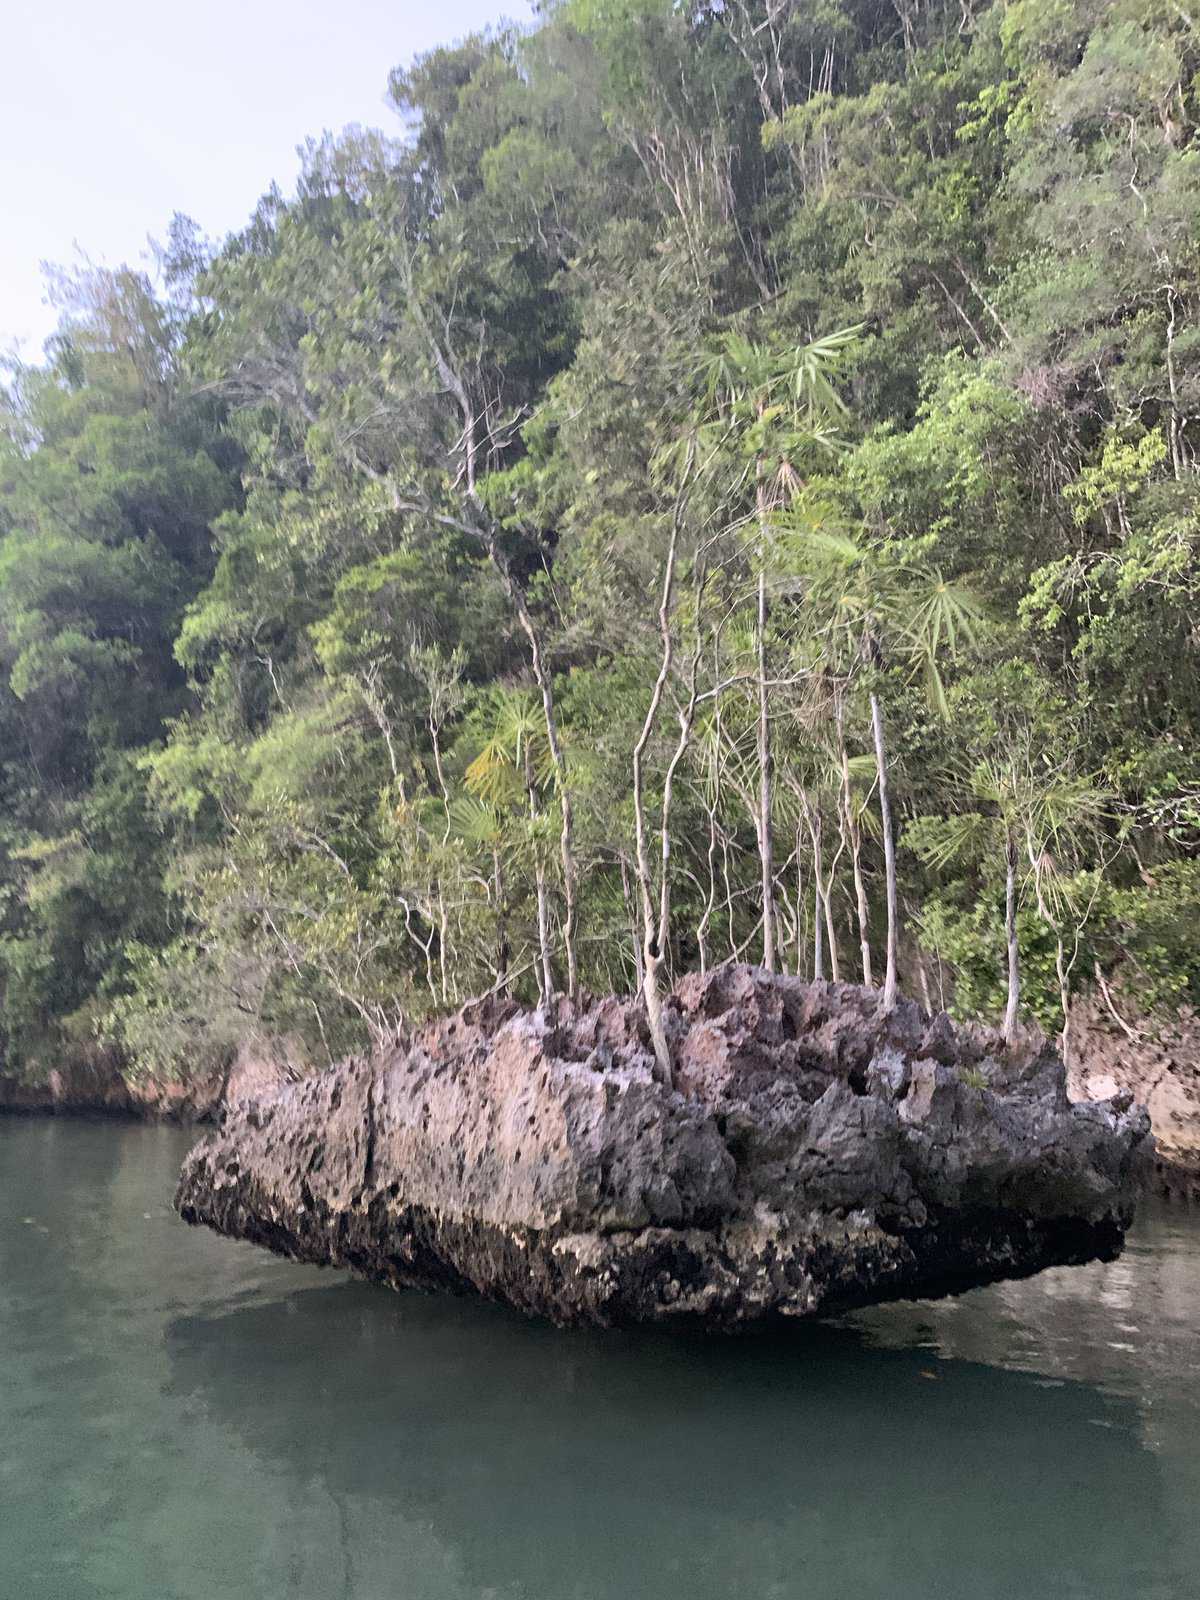 a small island of palm trees perched in the water, in Los Haitises National Park.